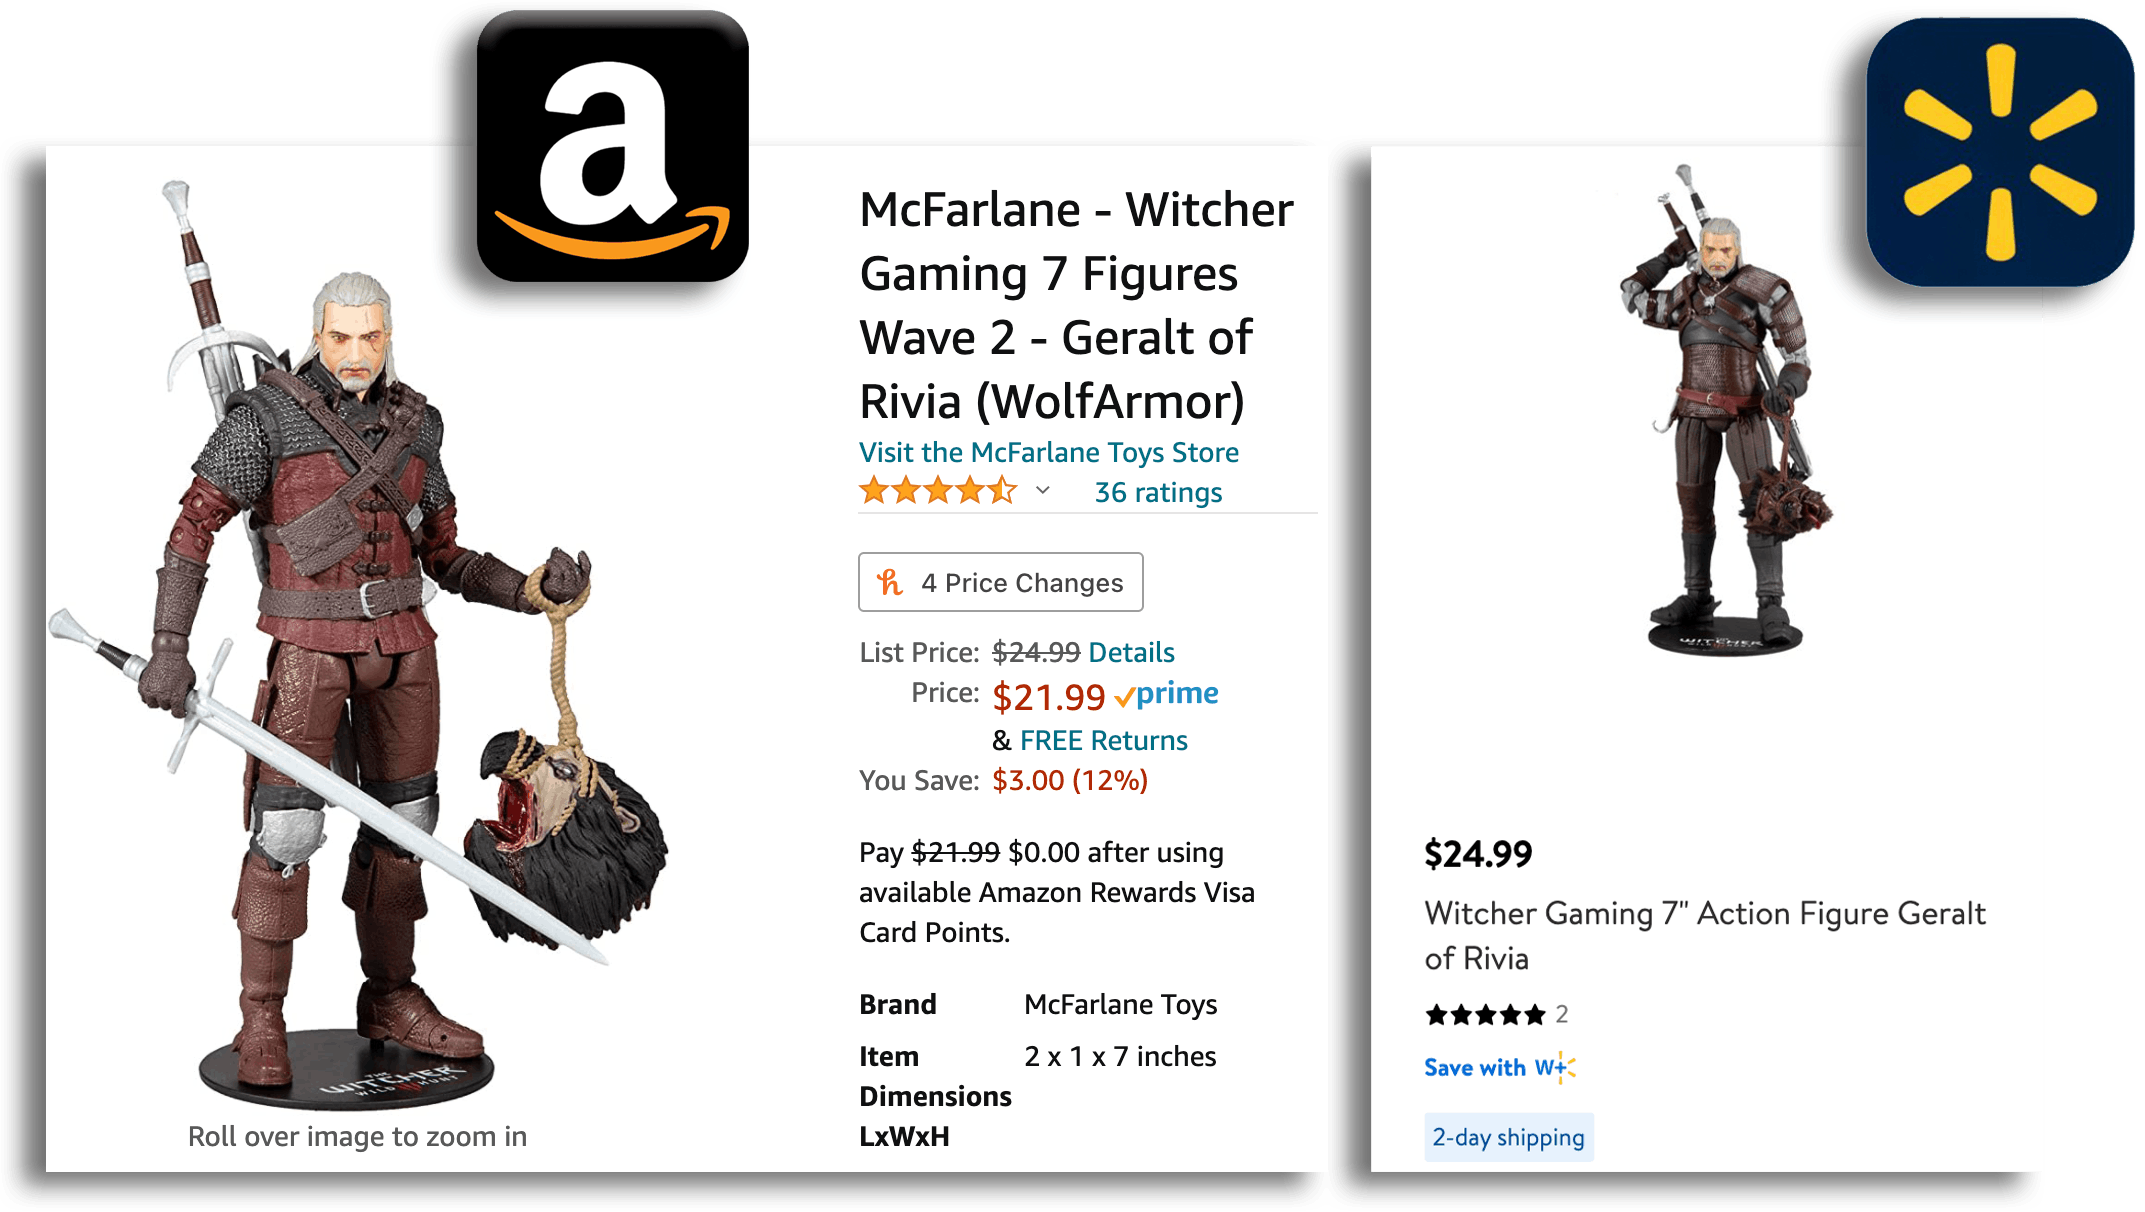 The Witcher figures are cheaper at Amazon than Walmart